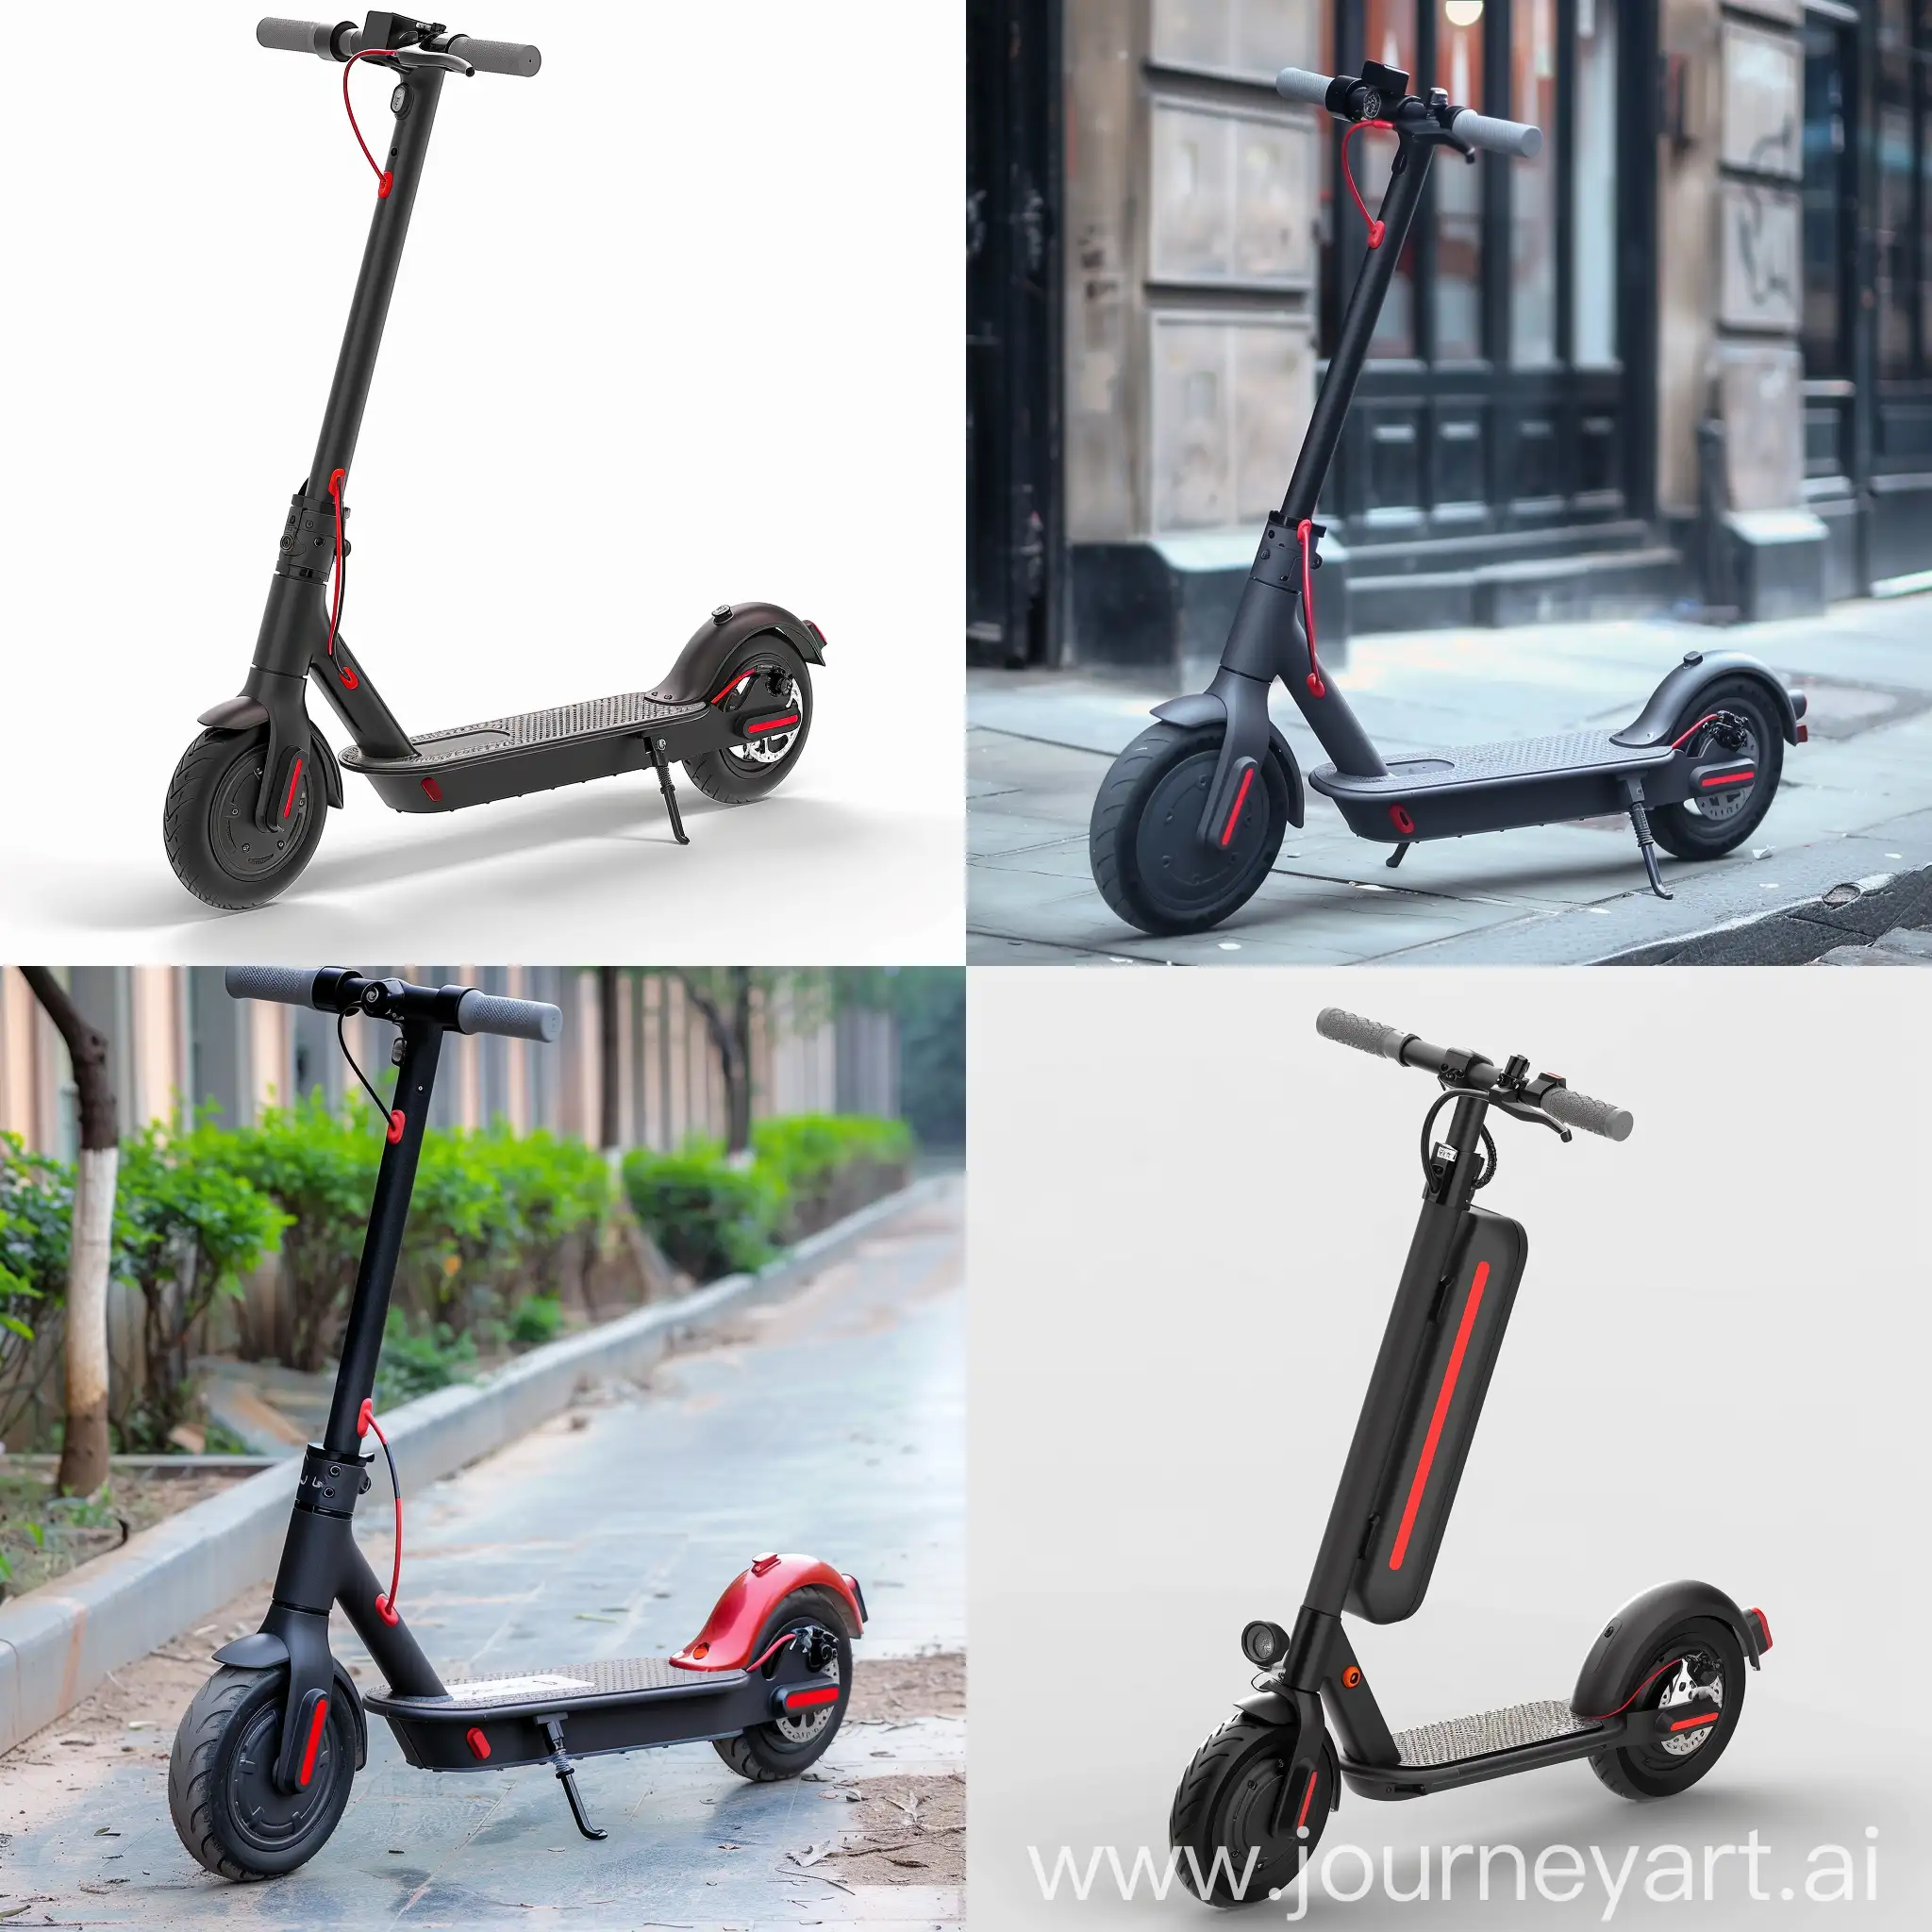 Urban-Commuting-with-Electric-Scooter-in-Vibrant-City-Setting